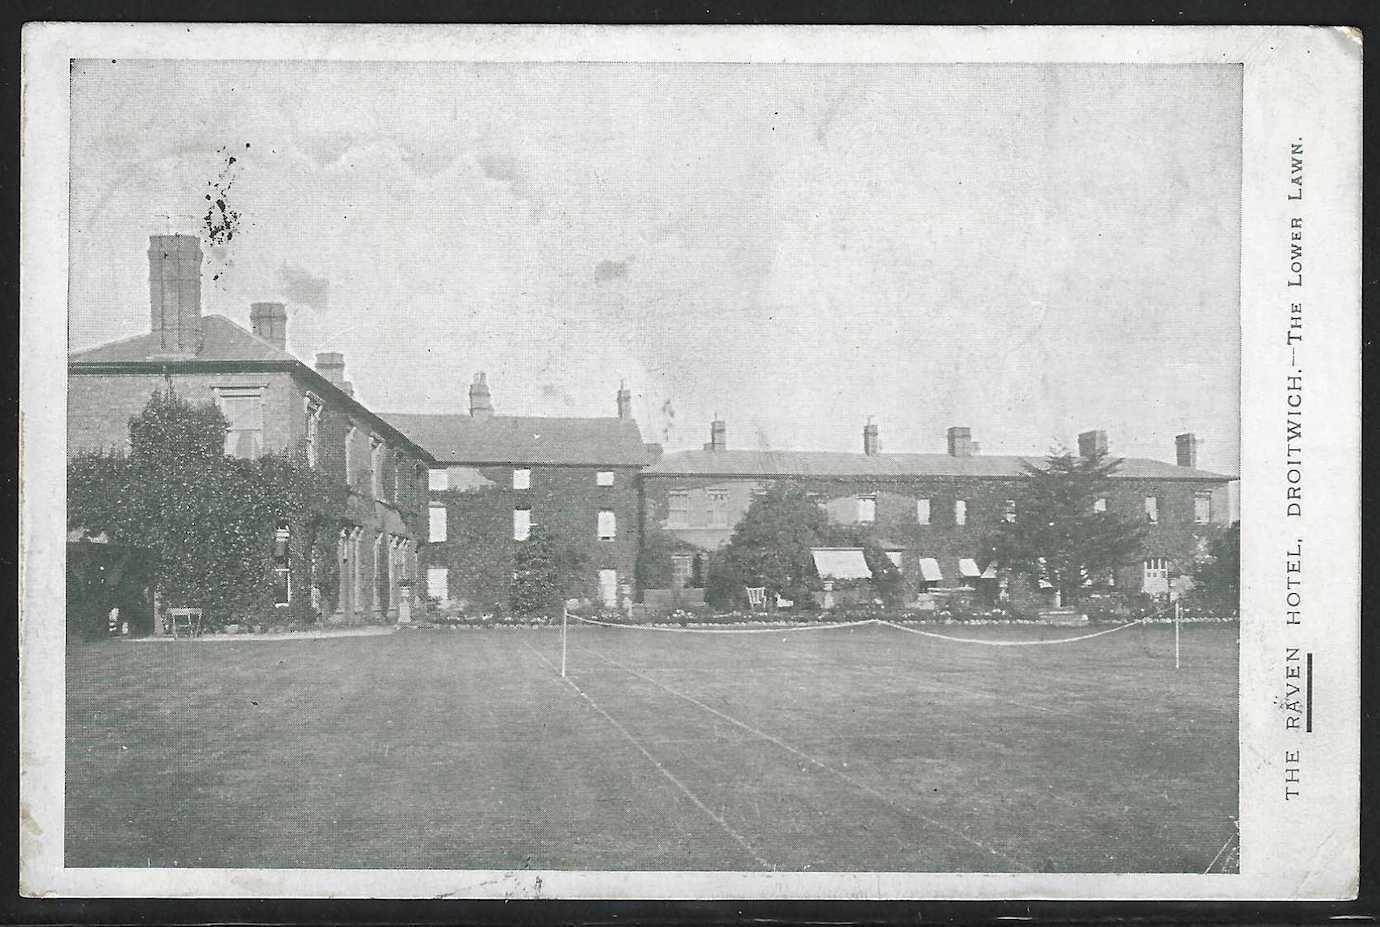 The Lower Lawn, The Raven Hotel, Droitwich, England, 1913 Postcard, Used